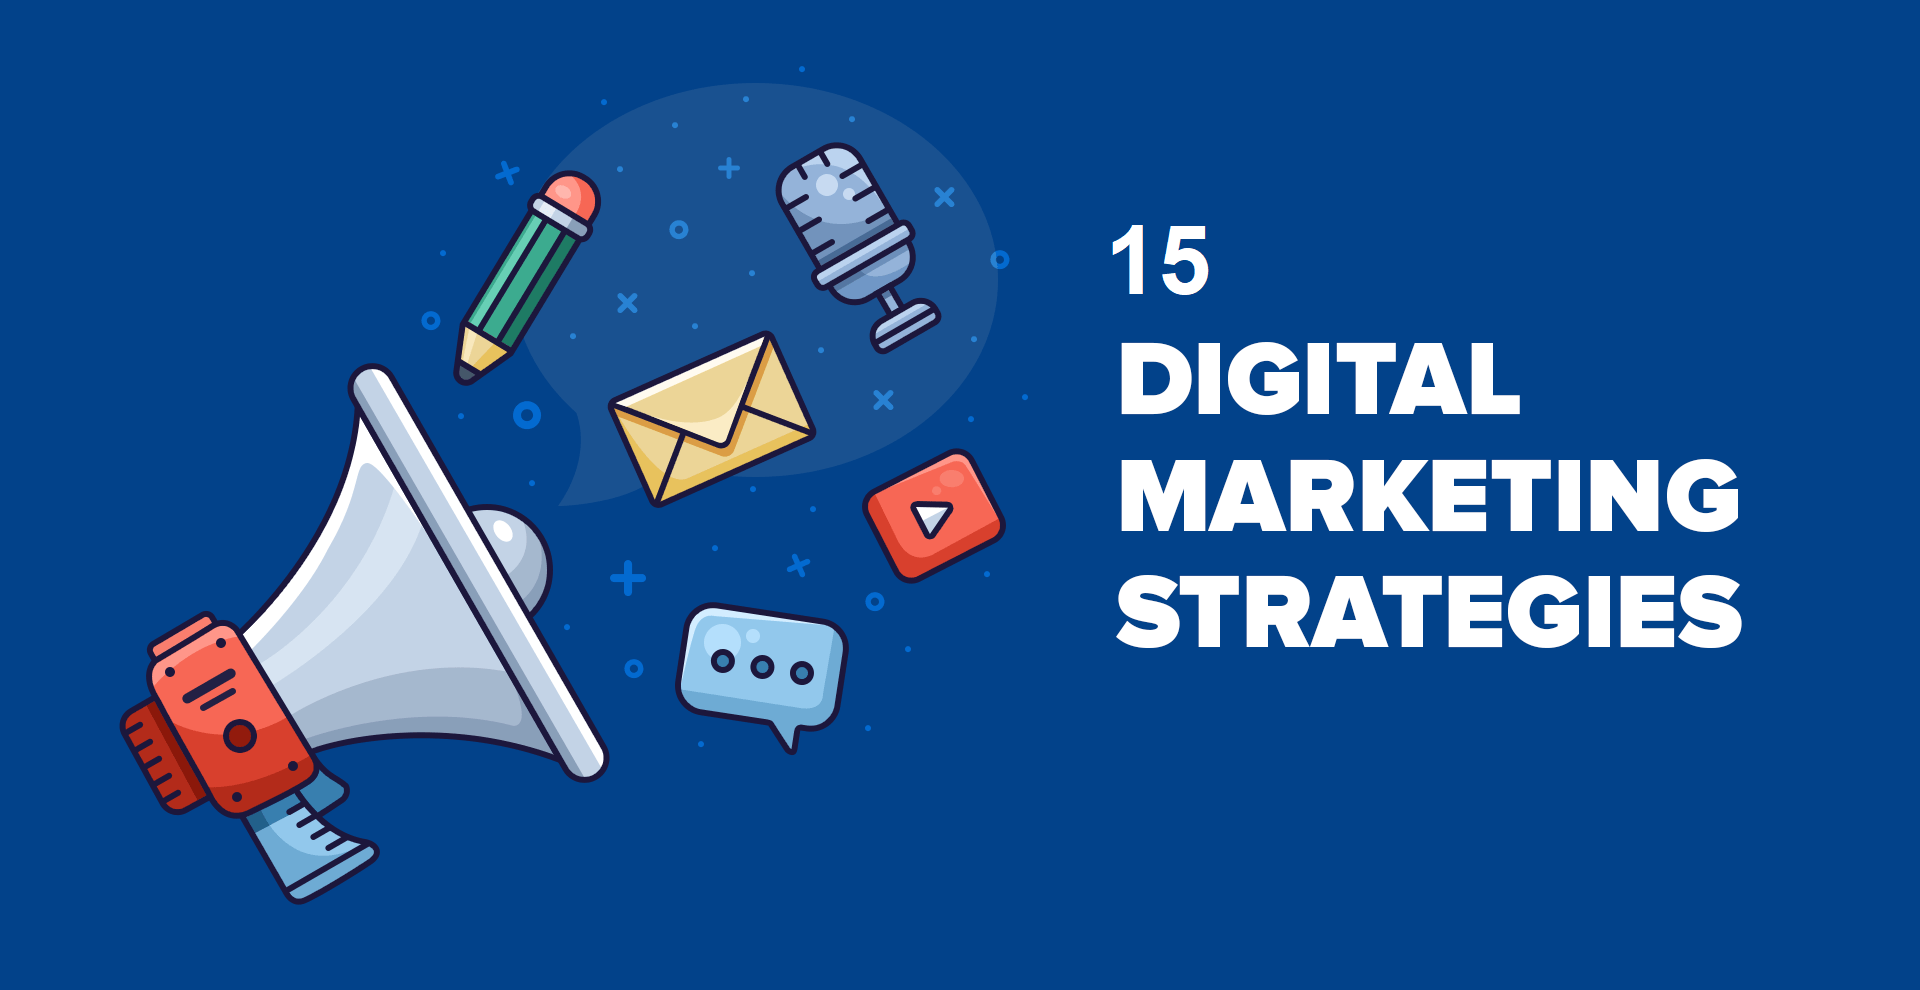 How to Make 15 Best Digital Marketing Strategies for Business Growth